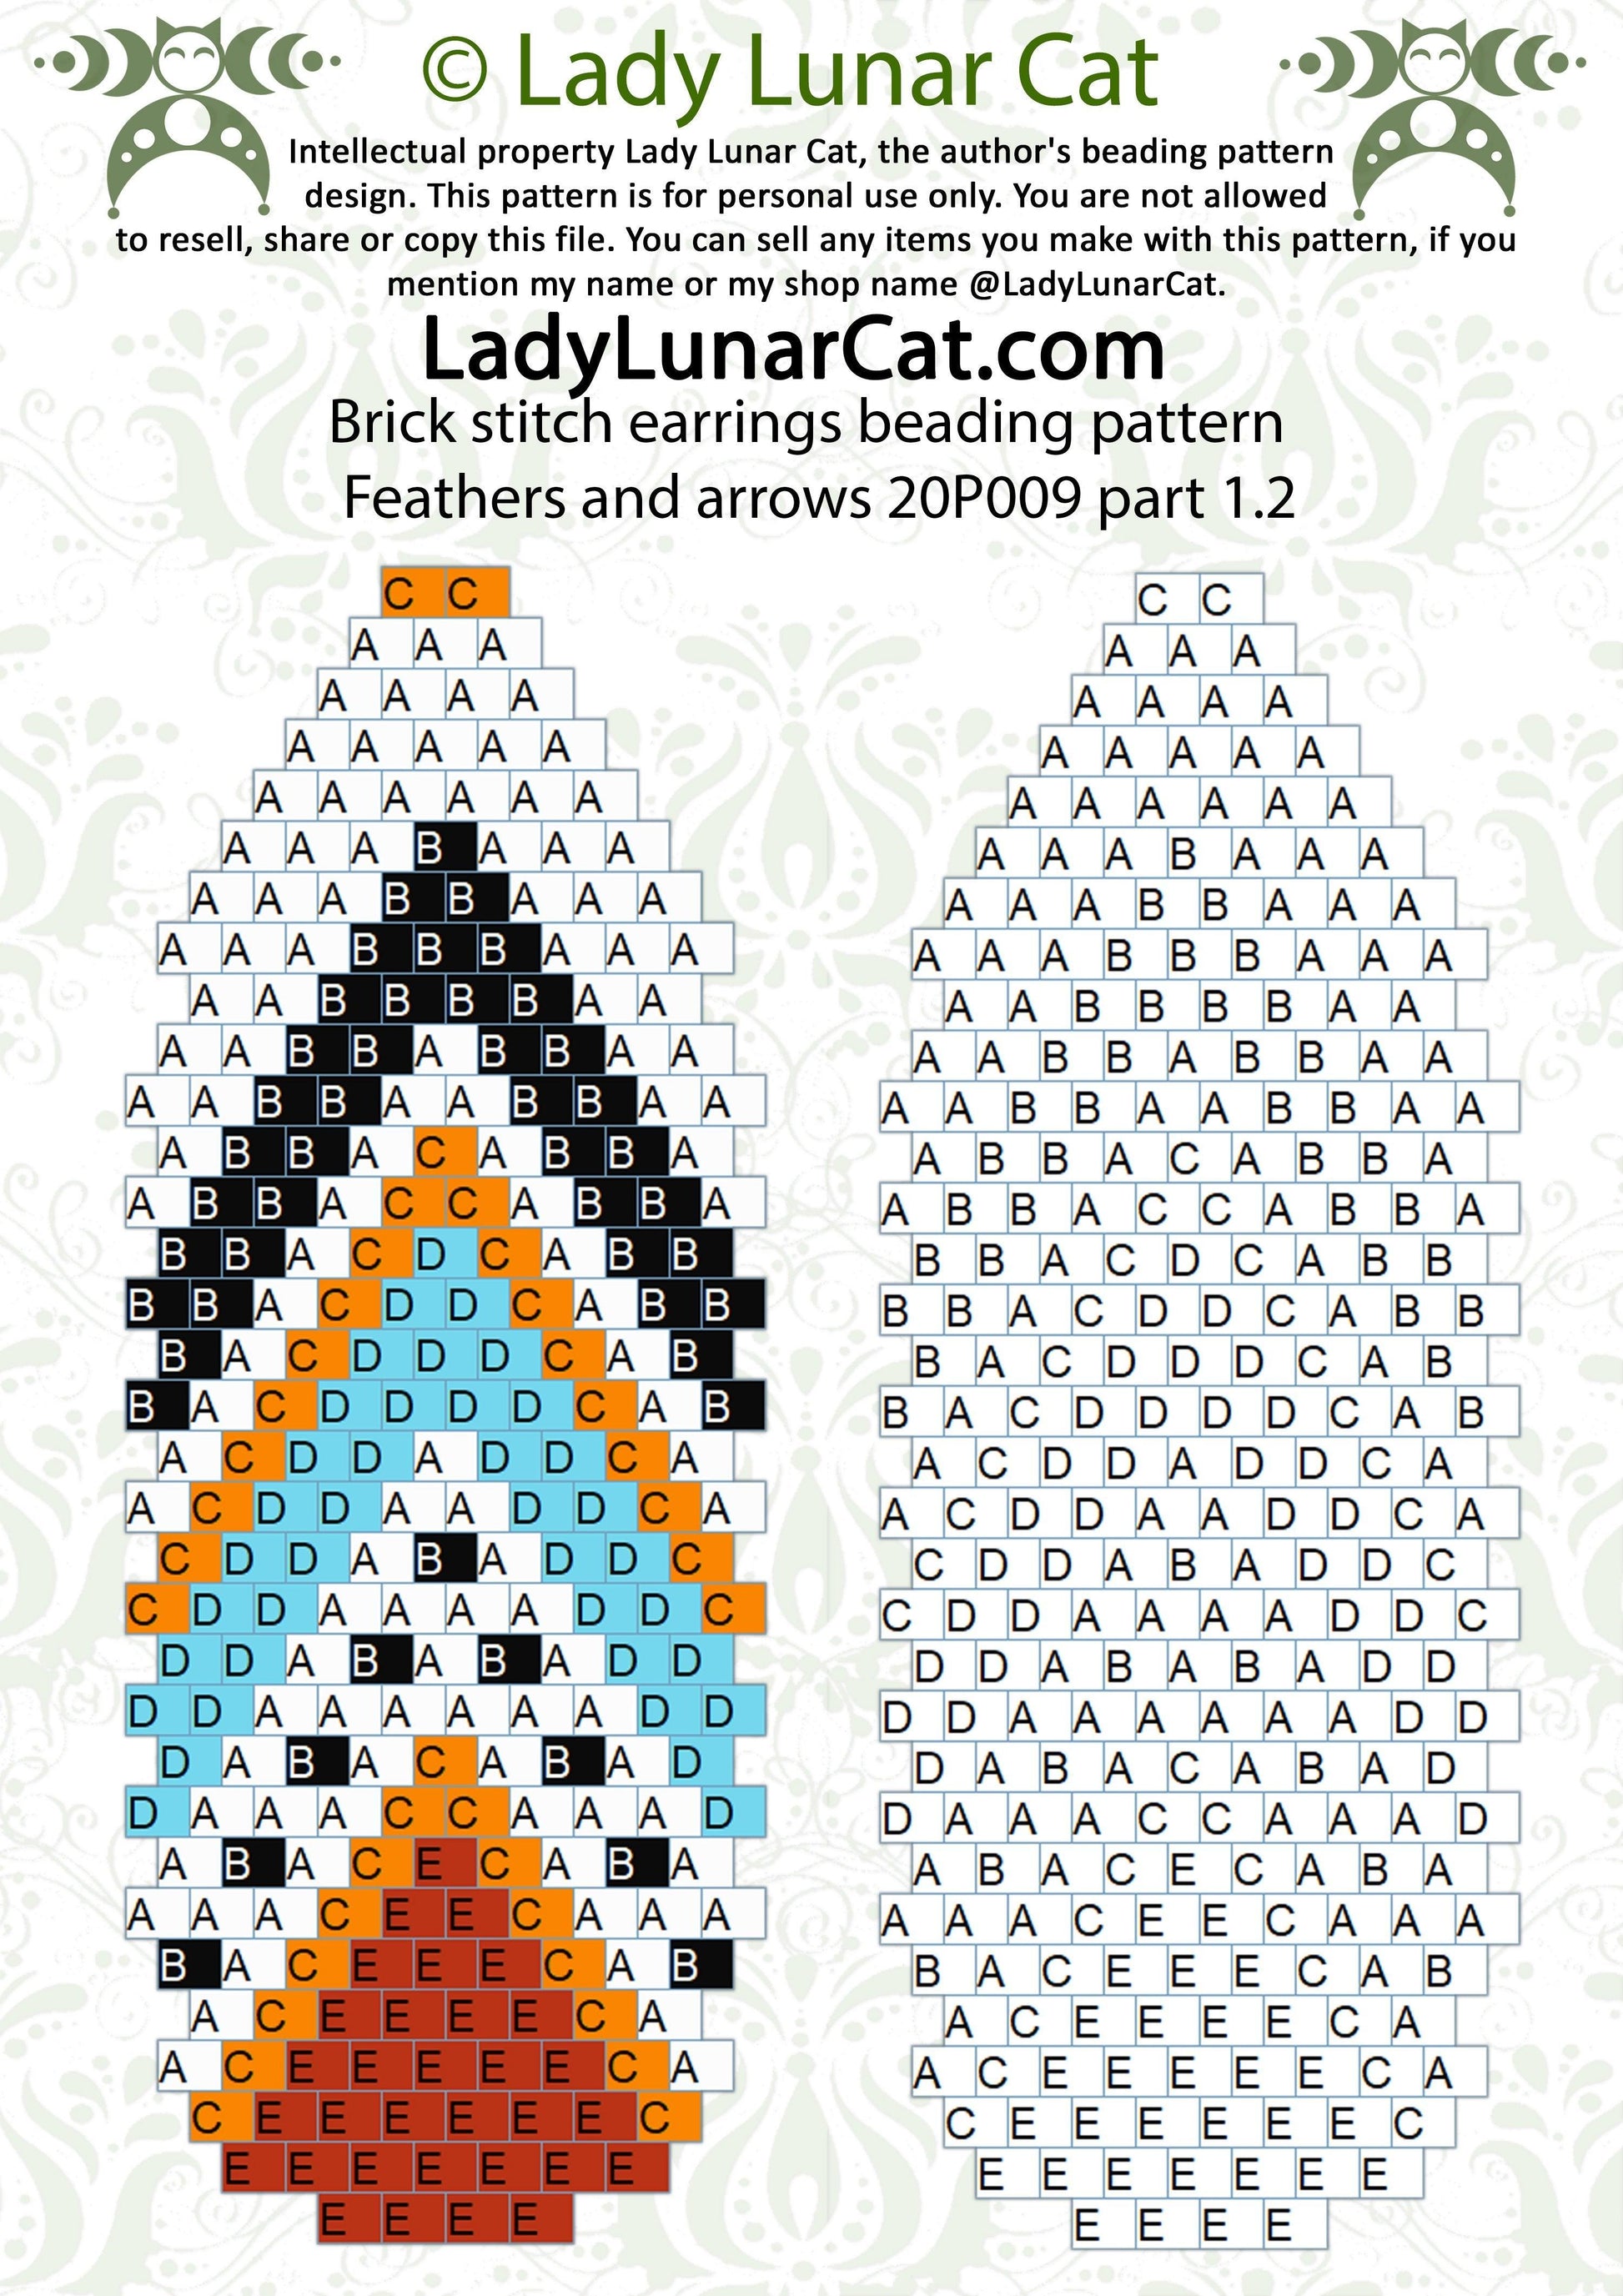 Brick stitch patterns for beading Feathers and arrows earrings